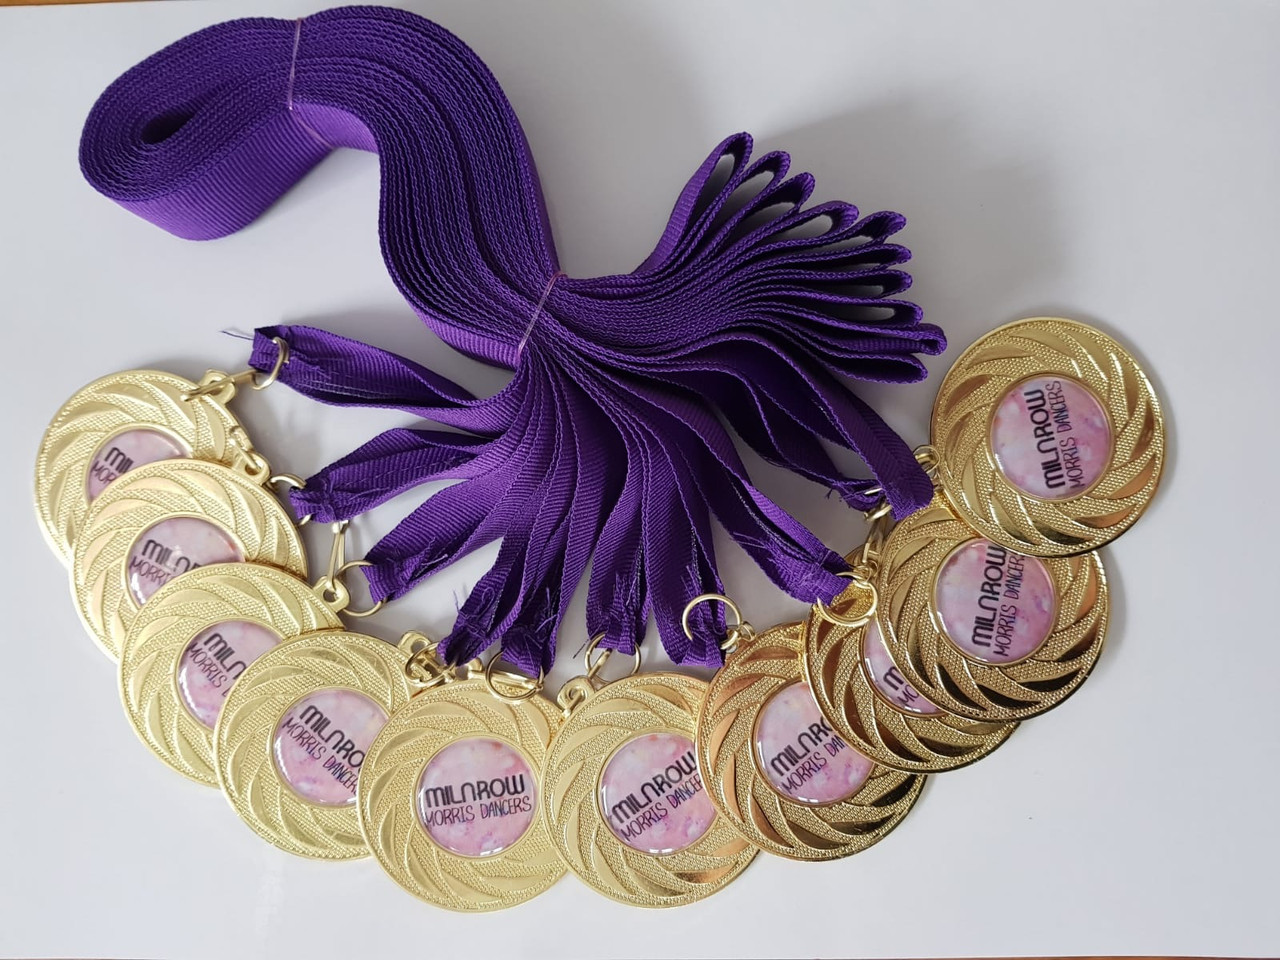 Budget affordable gold medals with custom logos